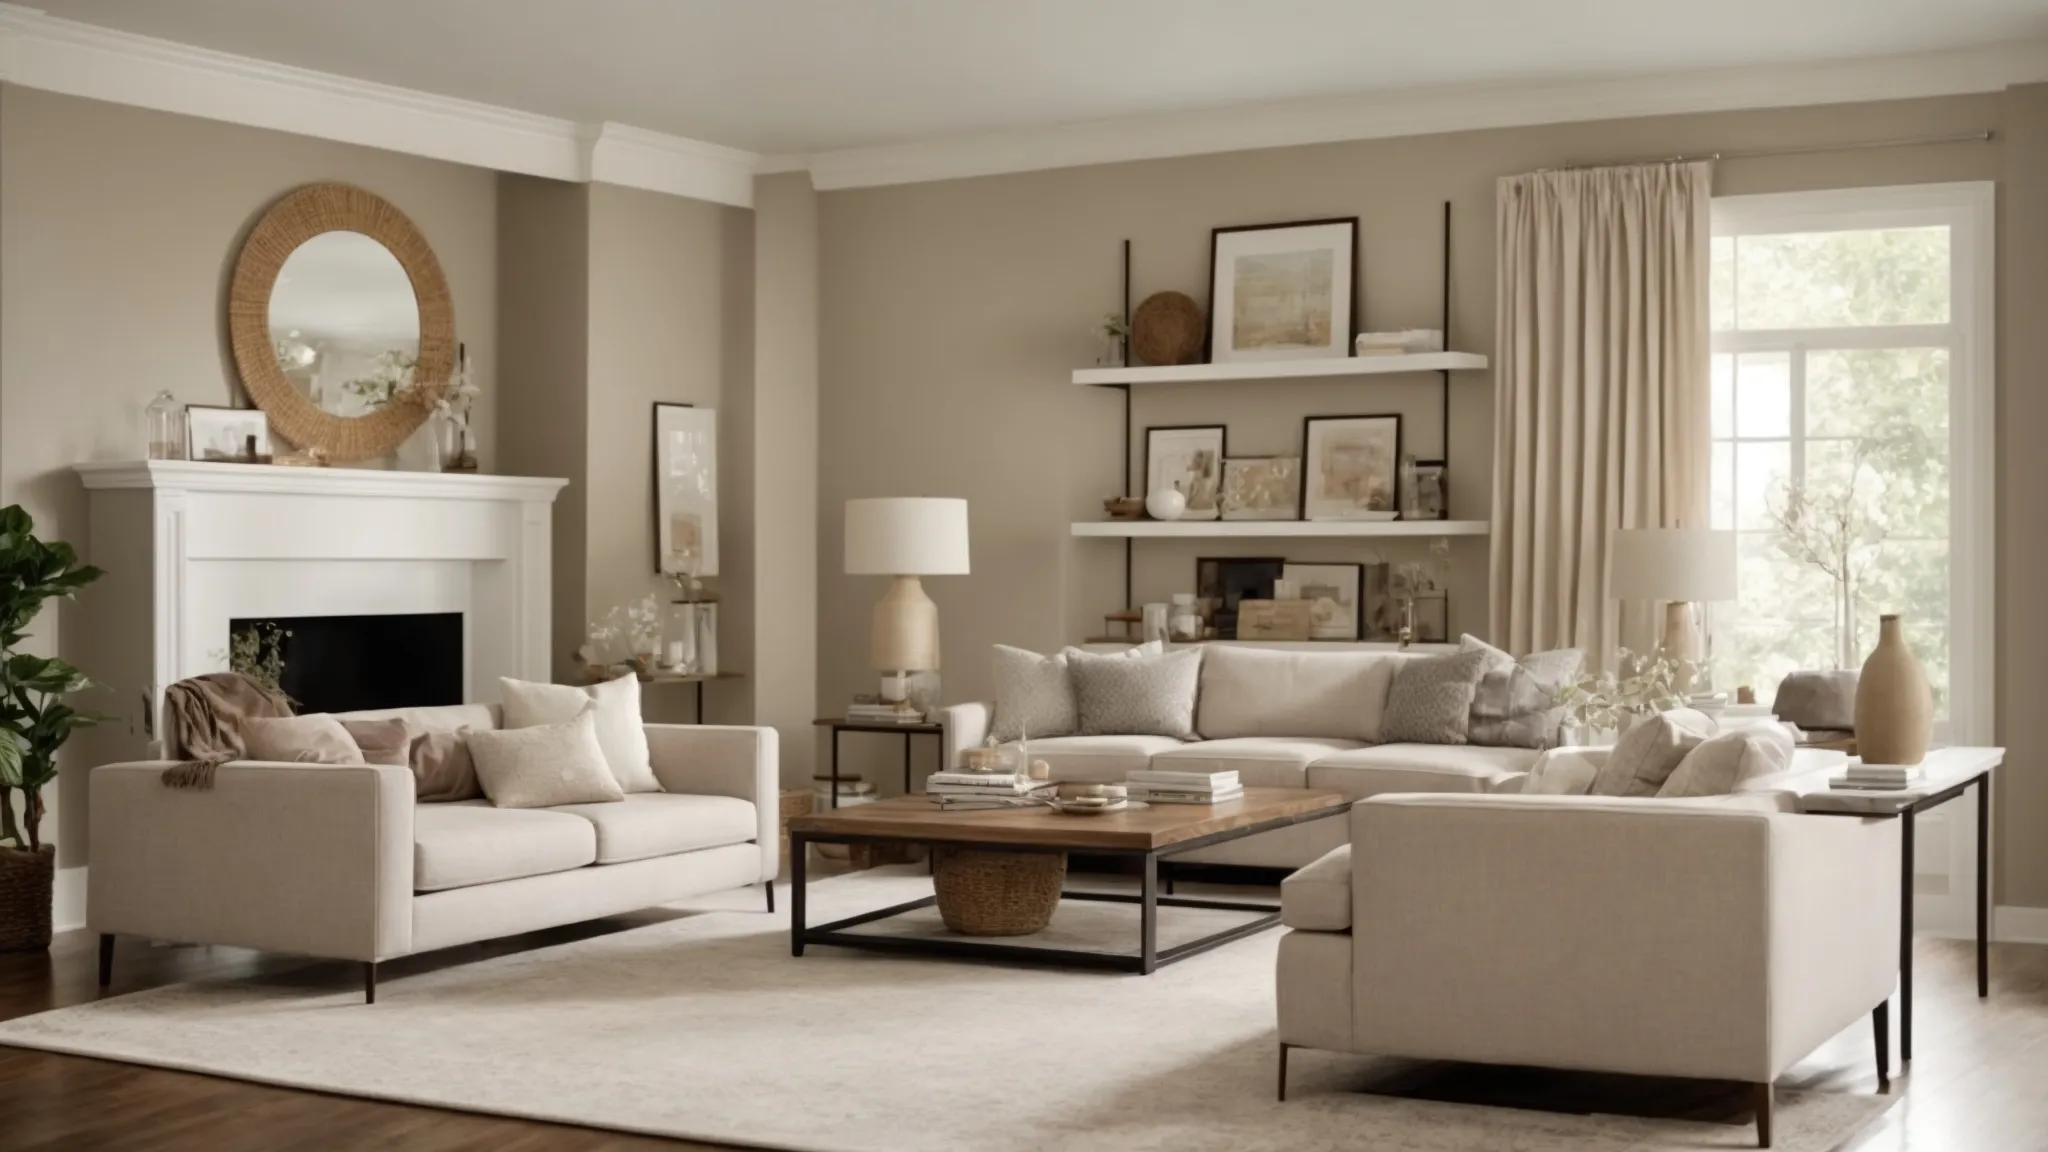 Create an image showcasing a well-staged living room with neutral colors, freshly painted walls, decluttered shelves, and strategically placed artwork, emphasizing the importance of presentation when preparing your house for a quick sale during divorce proceedings.